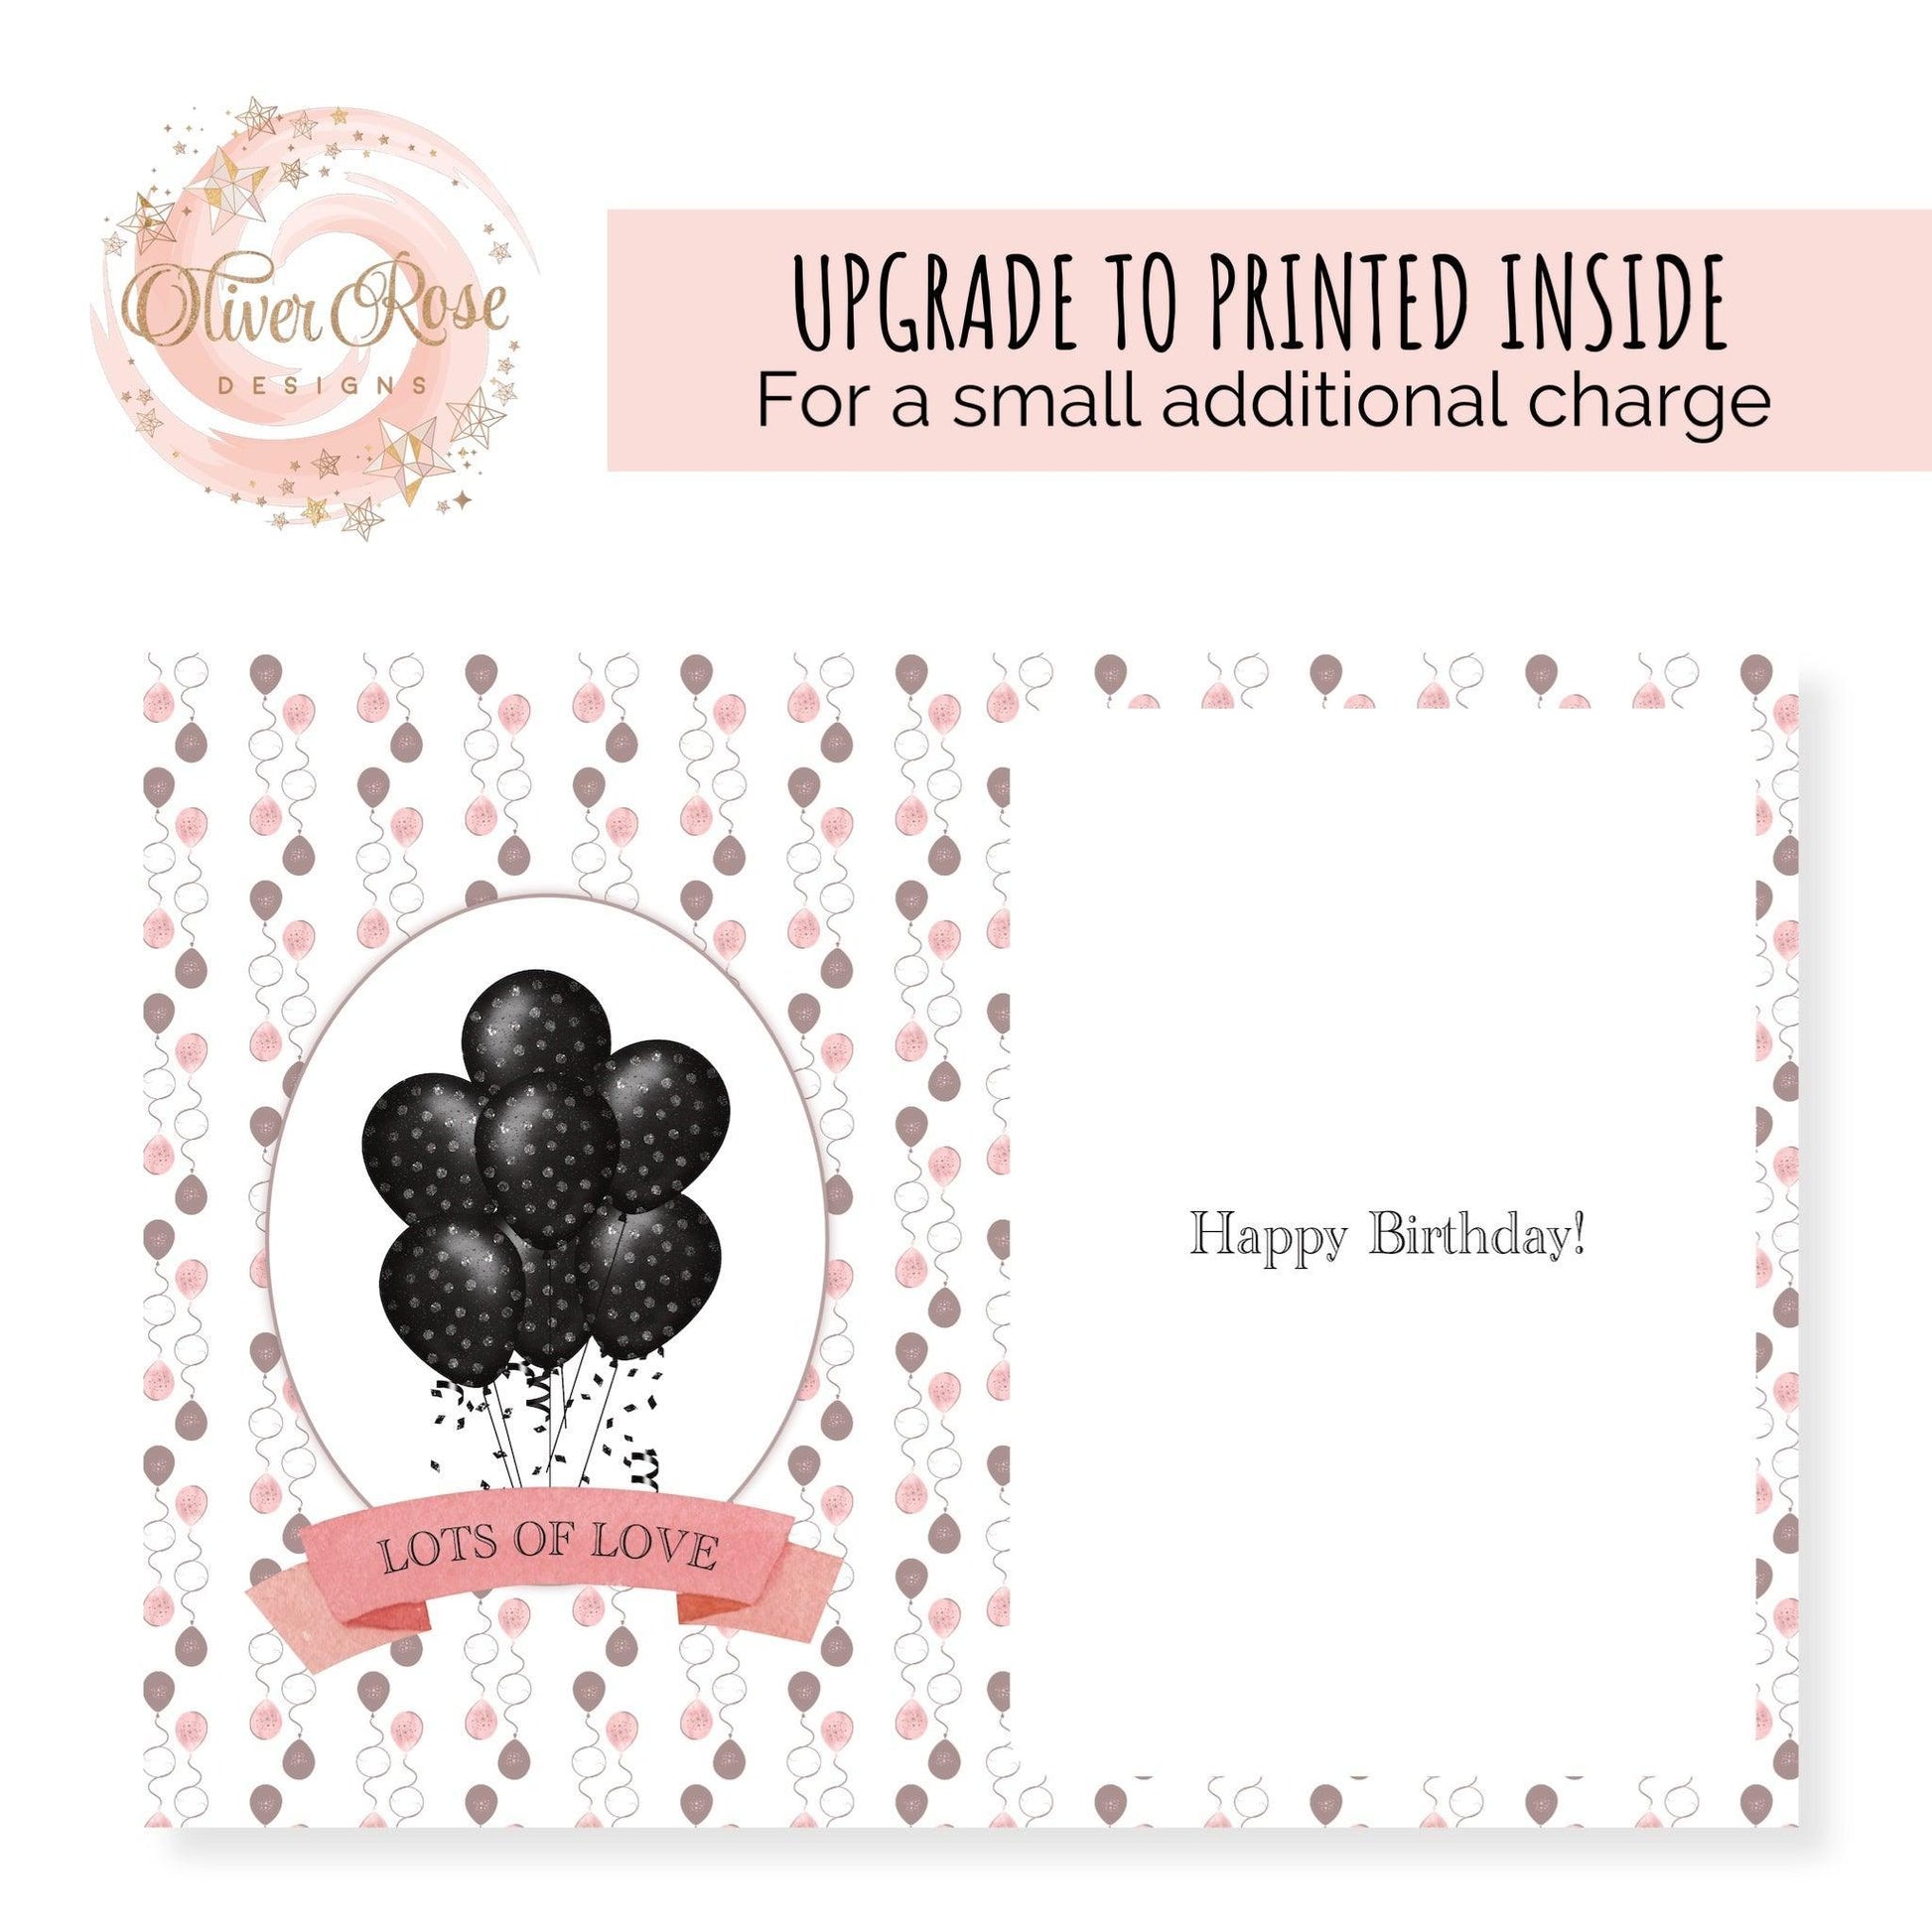 Printed Inside UPGRADE for Polka Dot Balloons Birthday Card, Black Polka Dot Balloons with pink banner saying LOTS OF LOVE & balloon pattern background, "Happy Birthday"